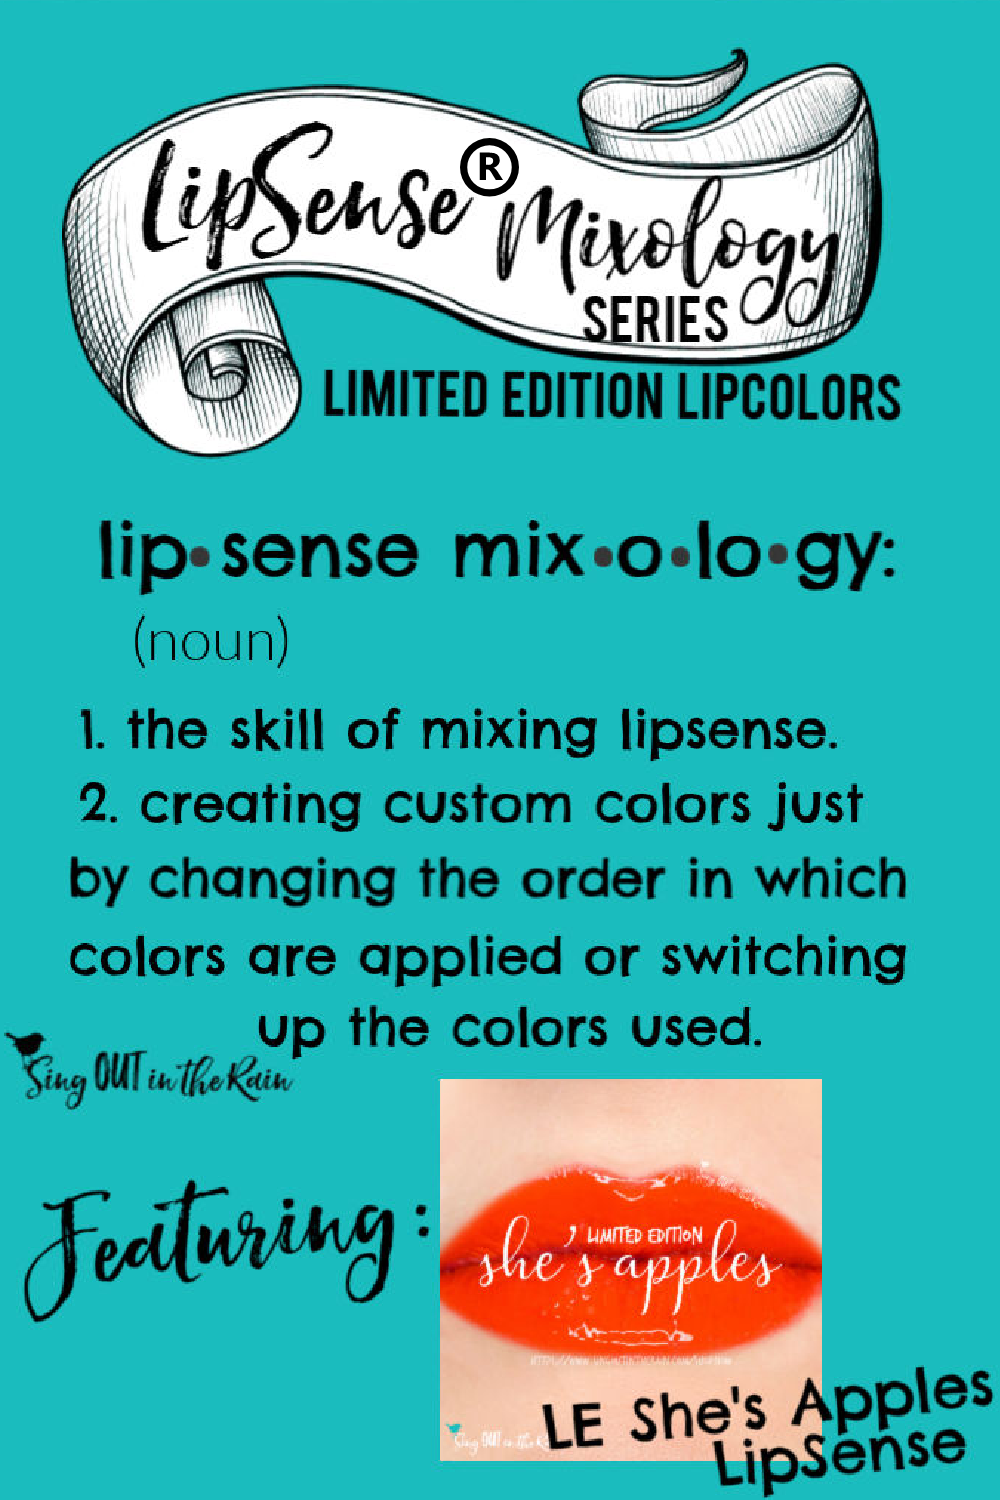 The Ultimate Guide to Shes Apples LipSense Mixology